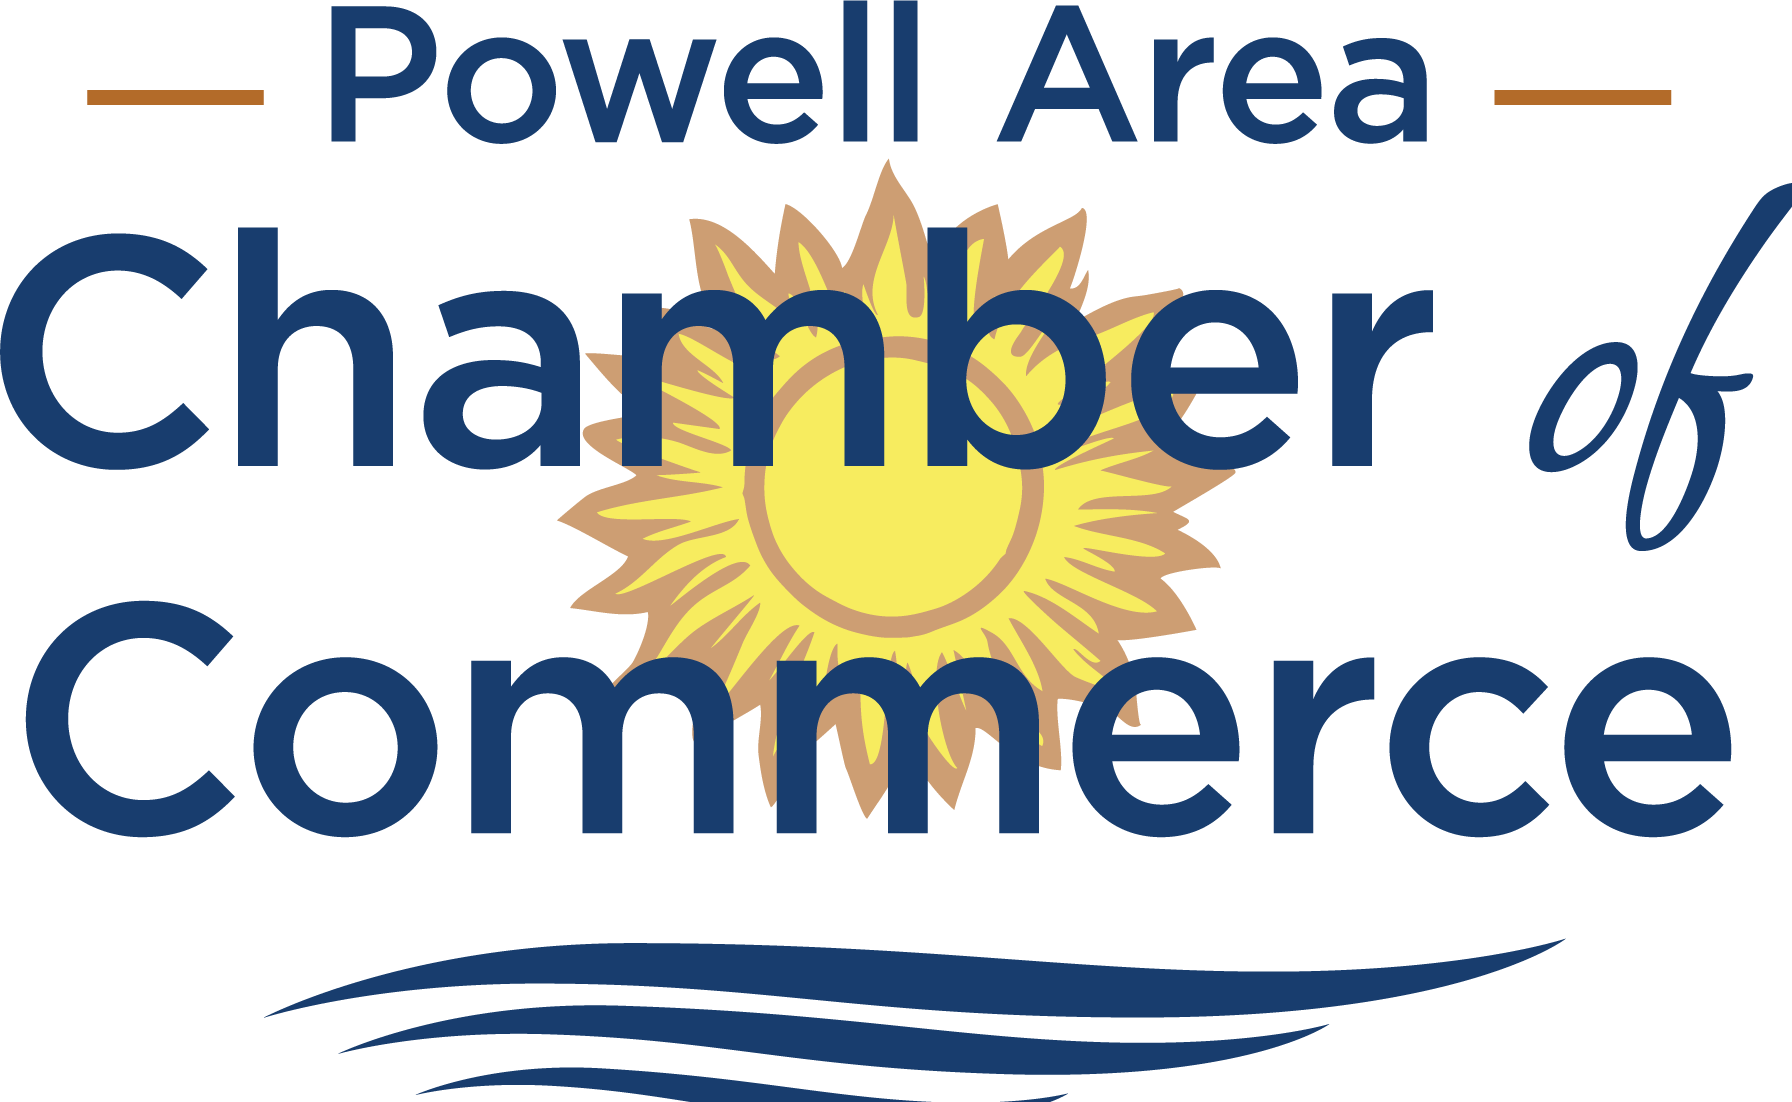 Powell Area Chamber of Commerce